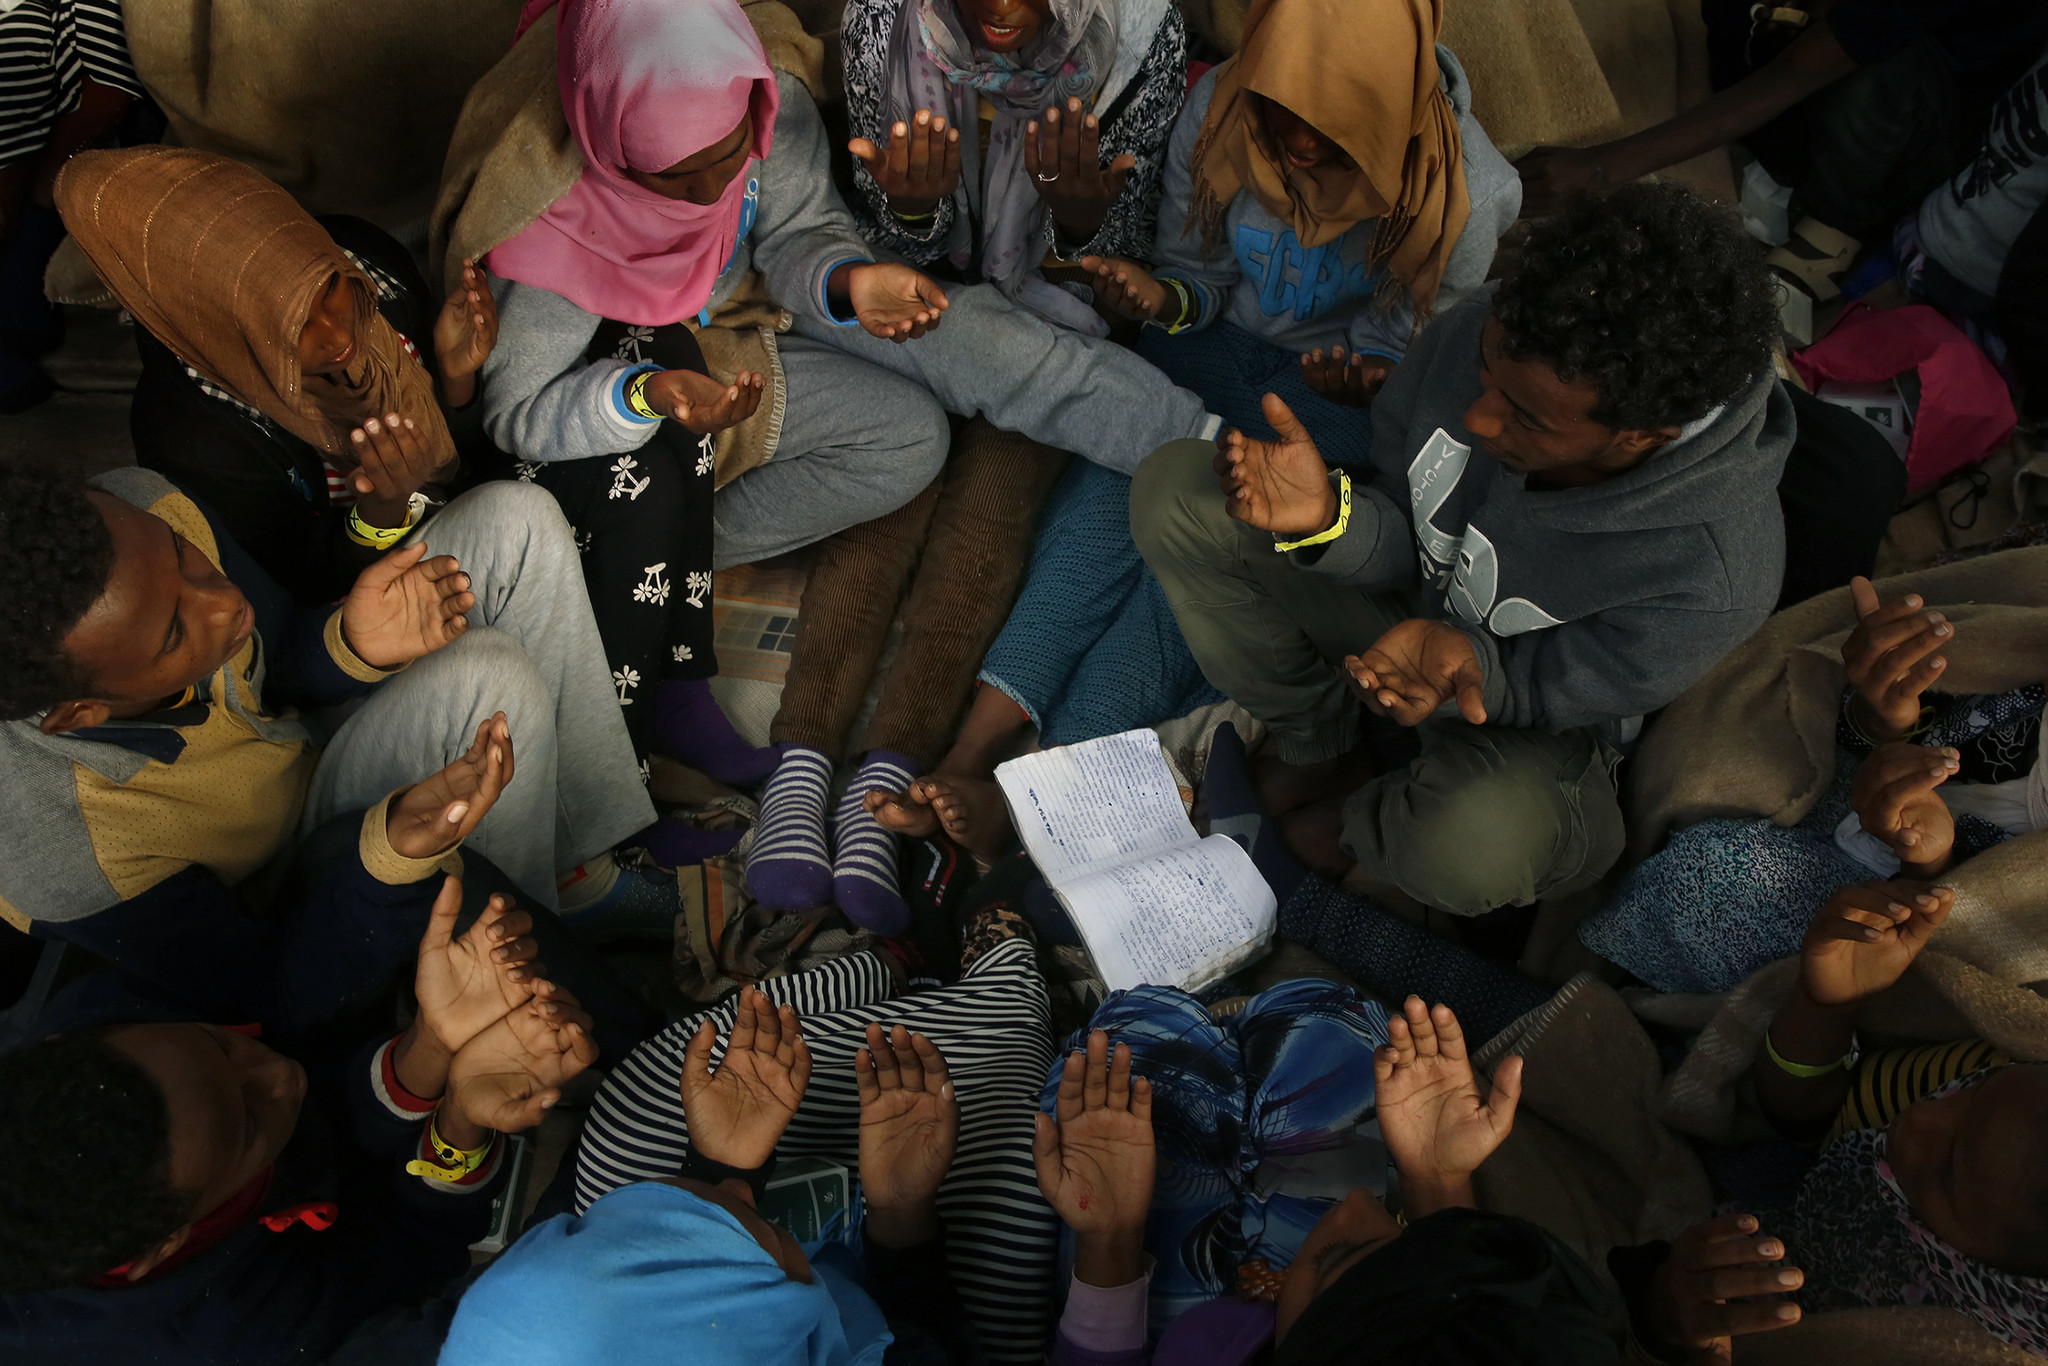 Migrants gather in a circle to sing and pray during the journey to Sicily. About 300 of the 412 rescued migrants were from Eritrea, where Christians and Muslims make up the majority of the population.